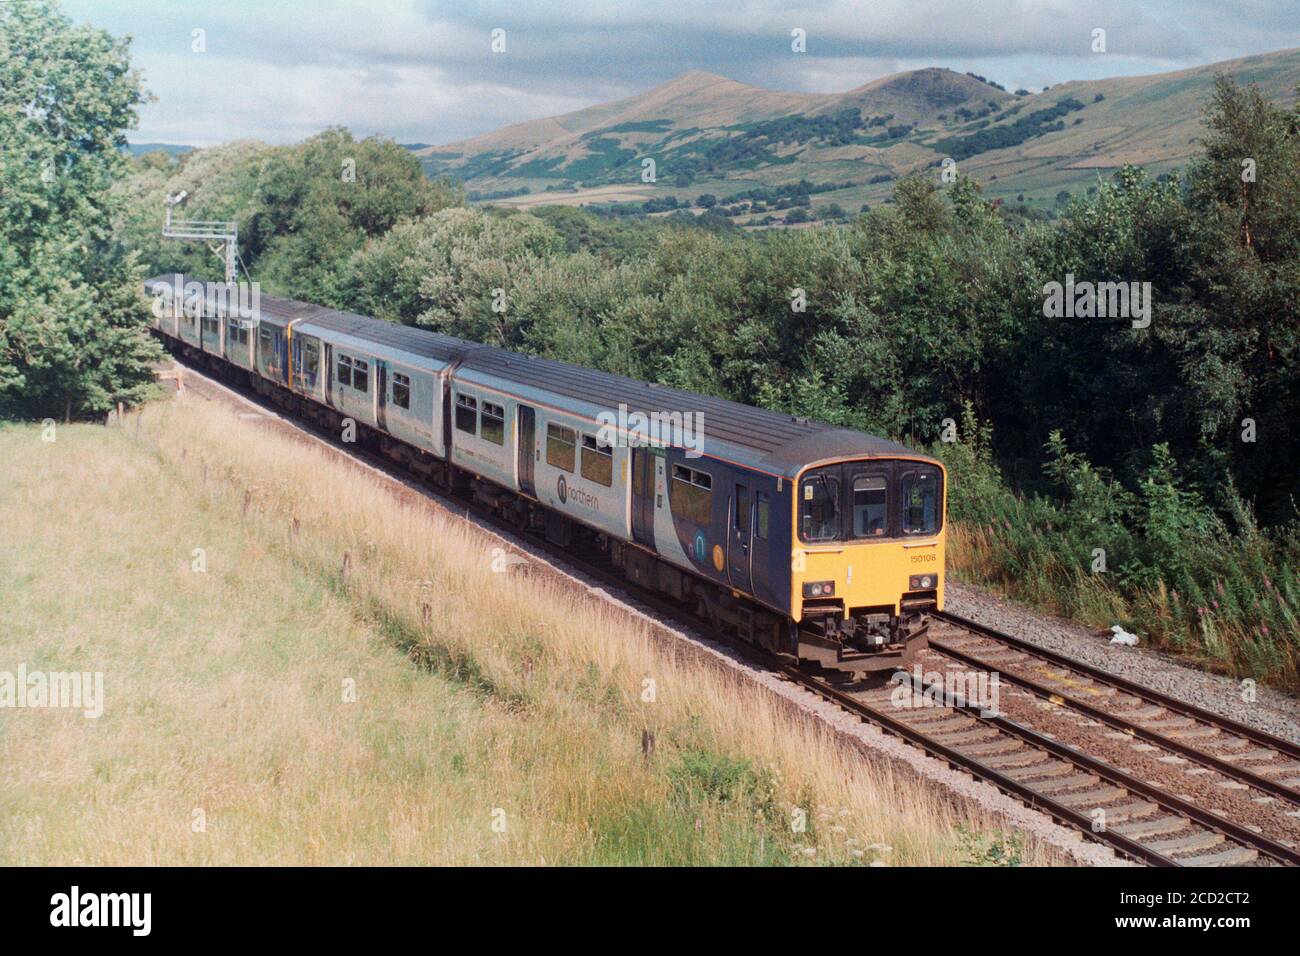 Edale, UK - 1 August 2020: A passenger train operation by Northern Trains for local service through Edale to Manchester direction. Stock Photo